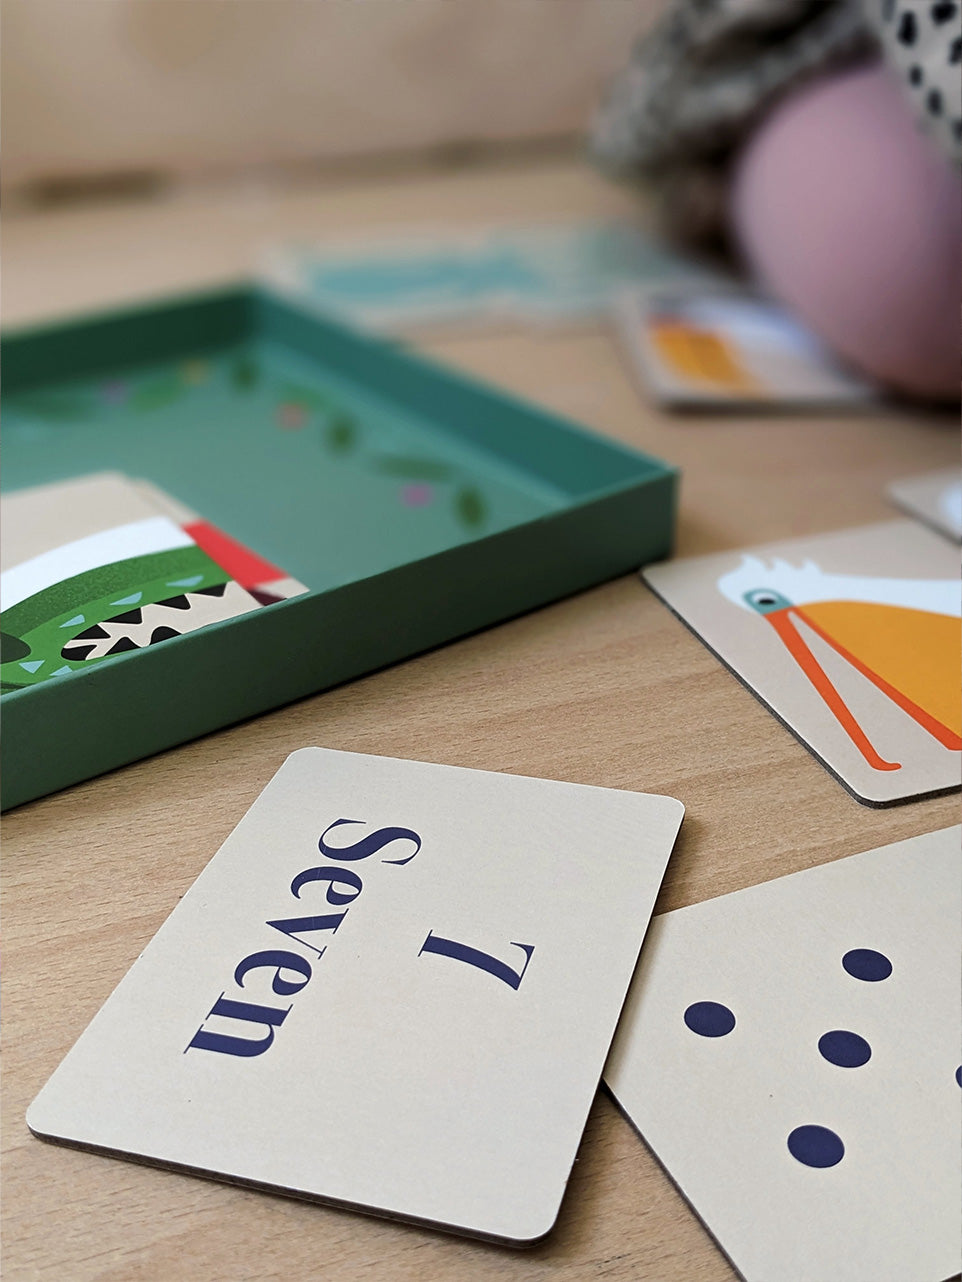 Toddler number game where each card with the word and digit matches a card with the corresponding amount of dots